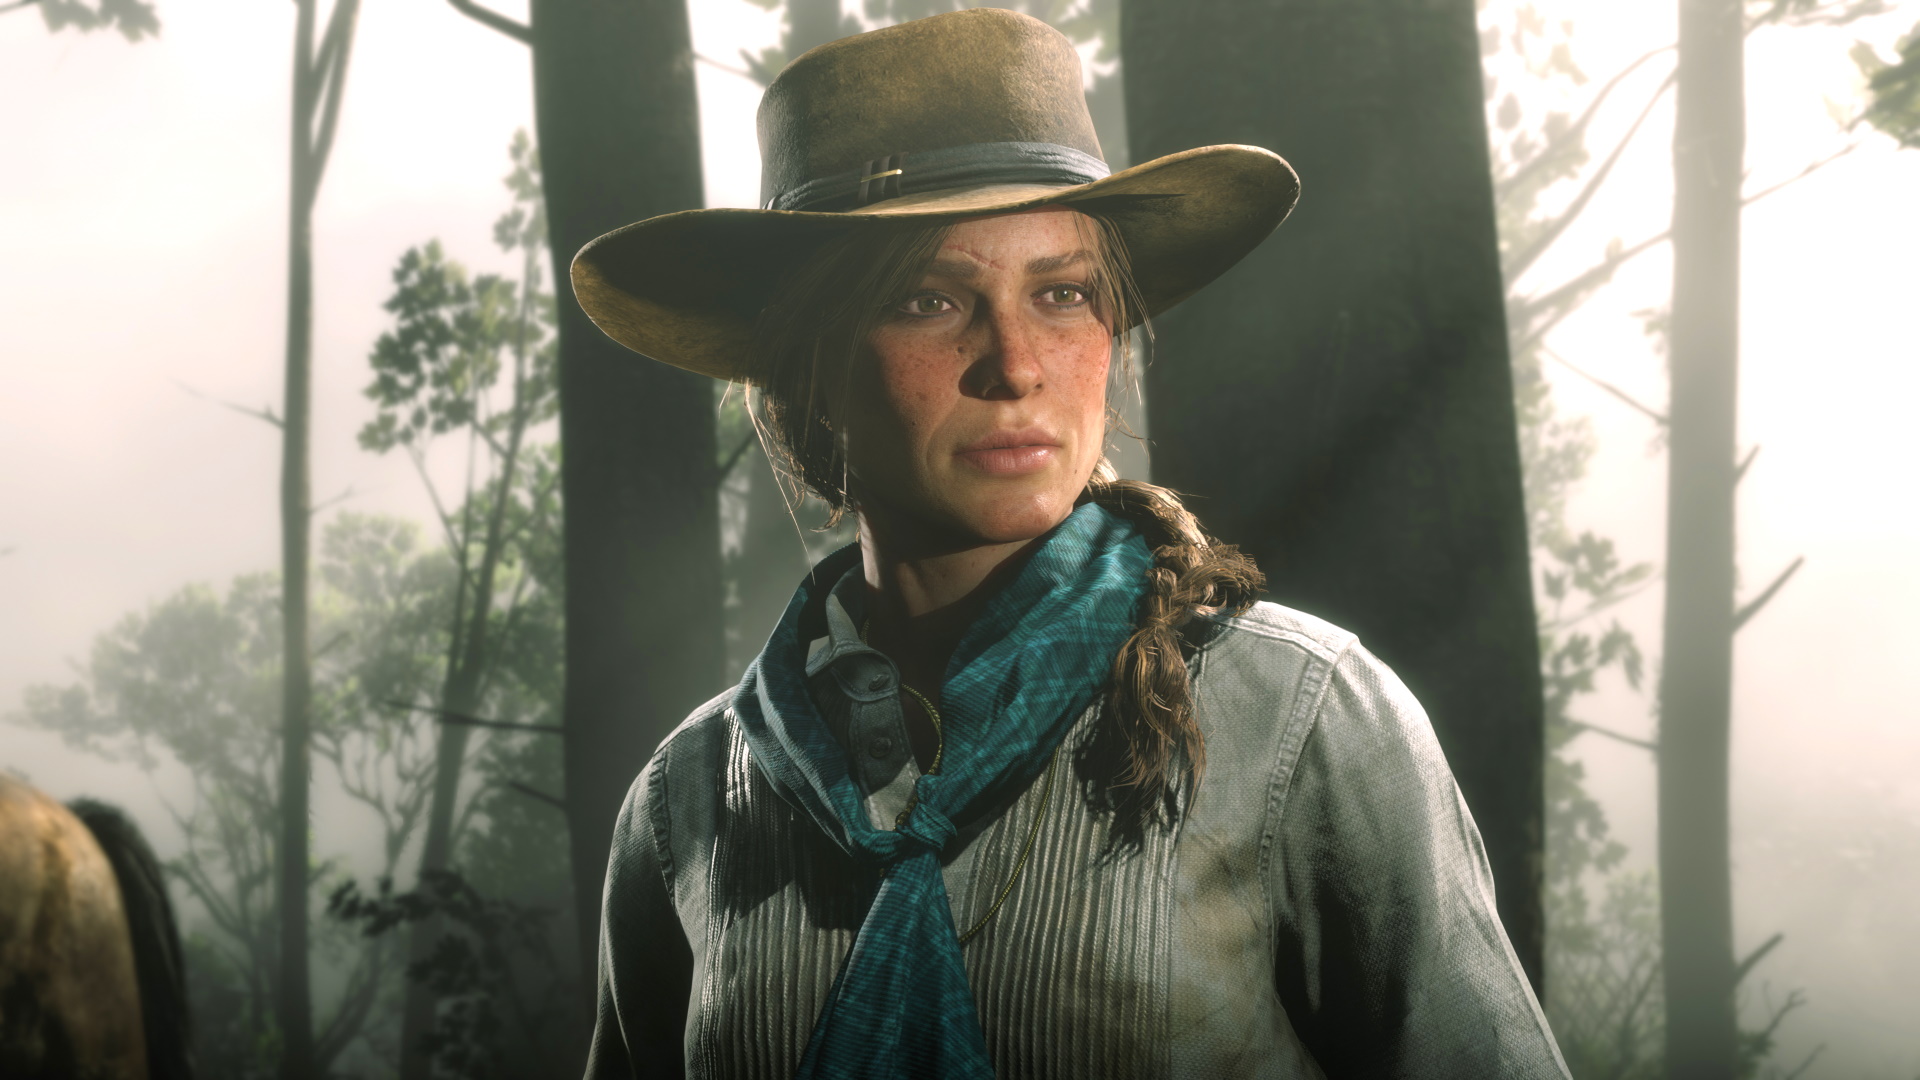 Red Dead Redemption 2 PC specs and requirements along with new content | GamesRadar+